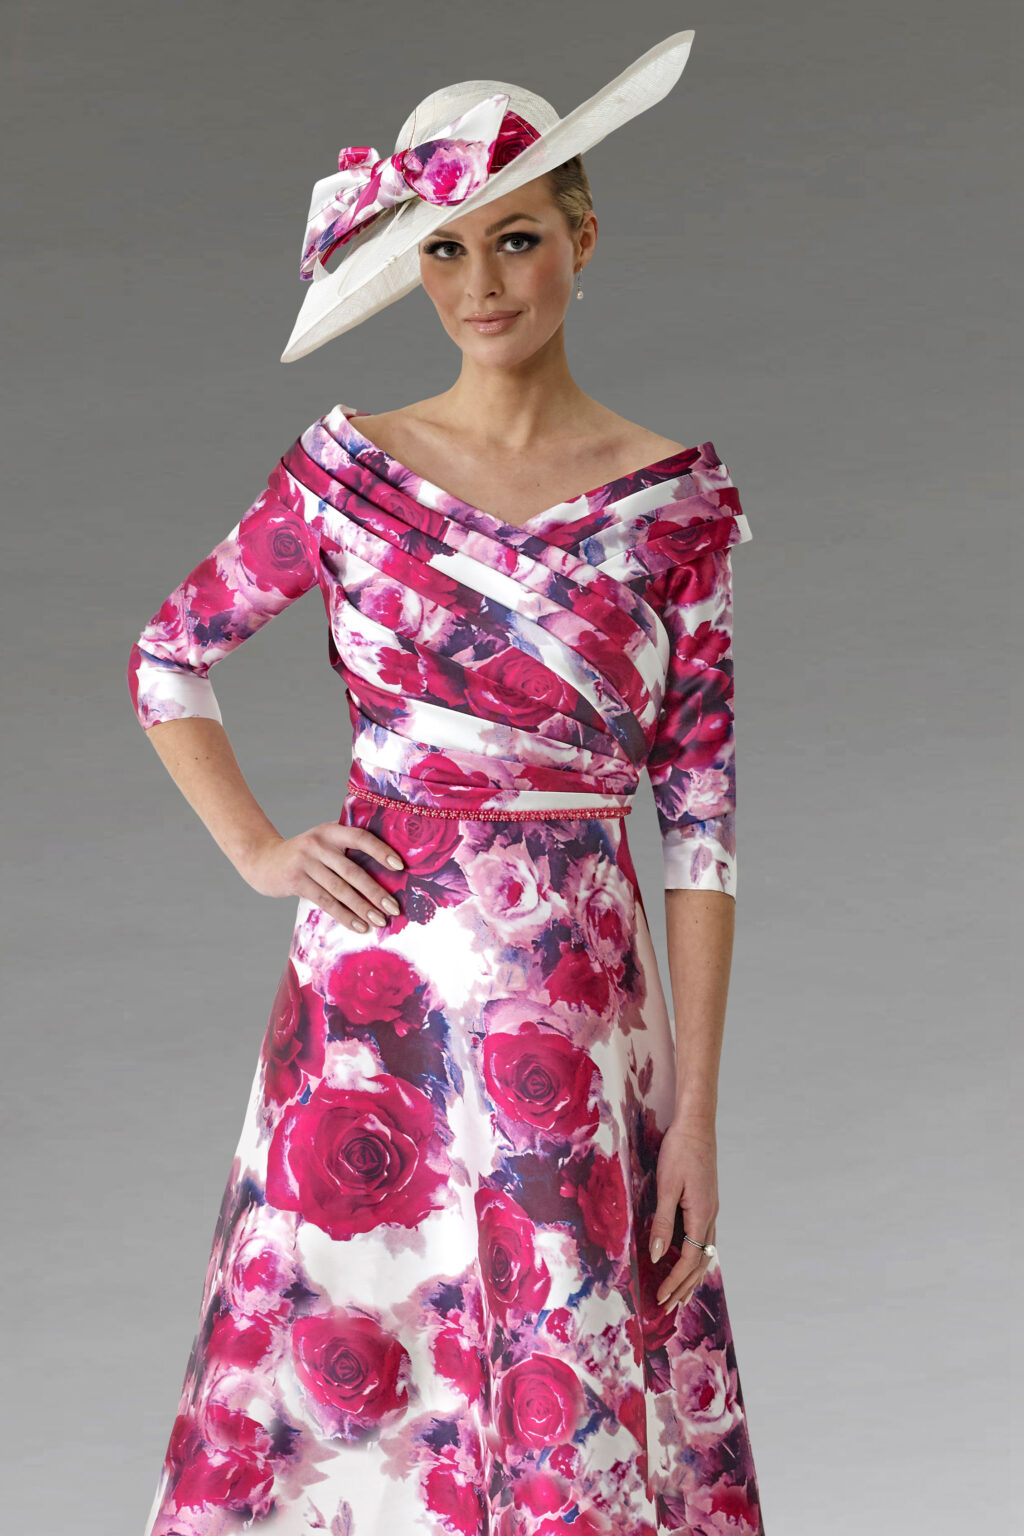 Mid Length Floral Print Dress. IR7337s - Catherines of Partick